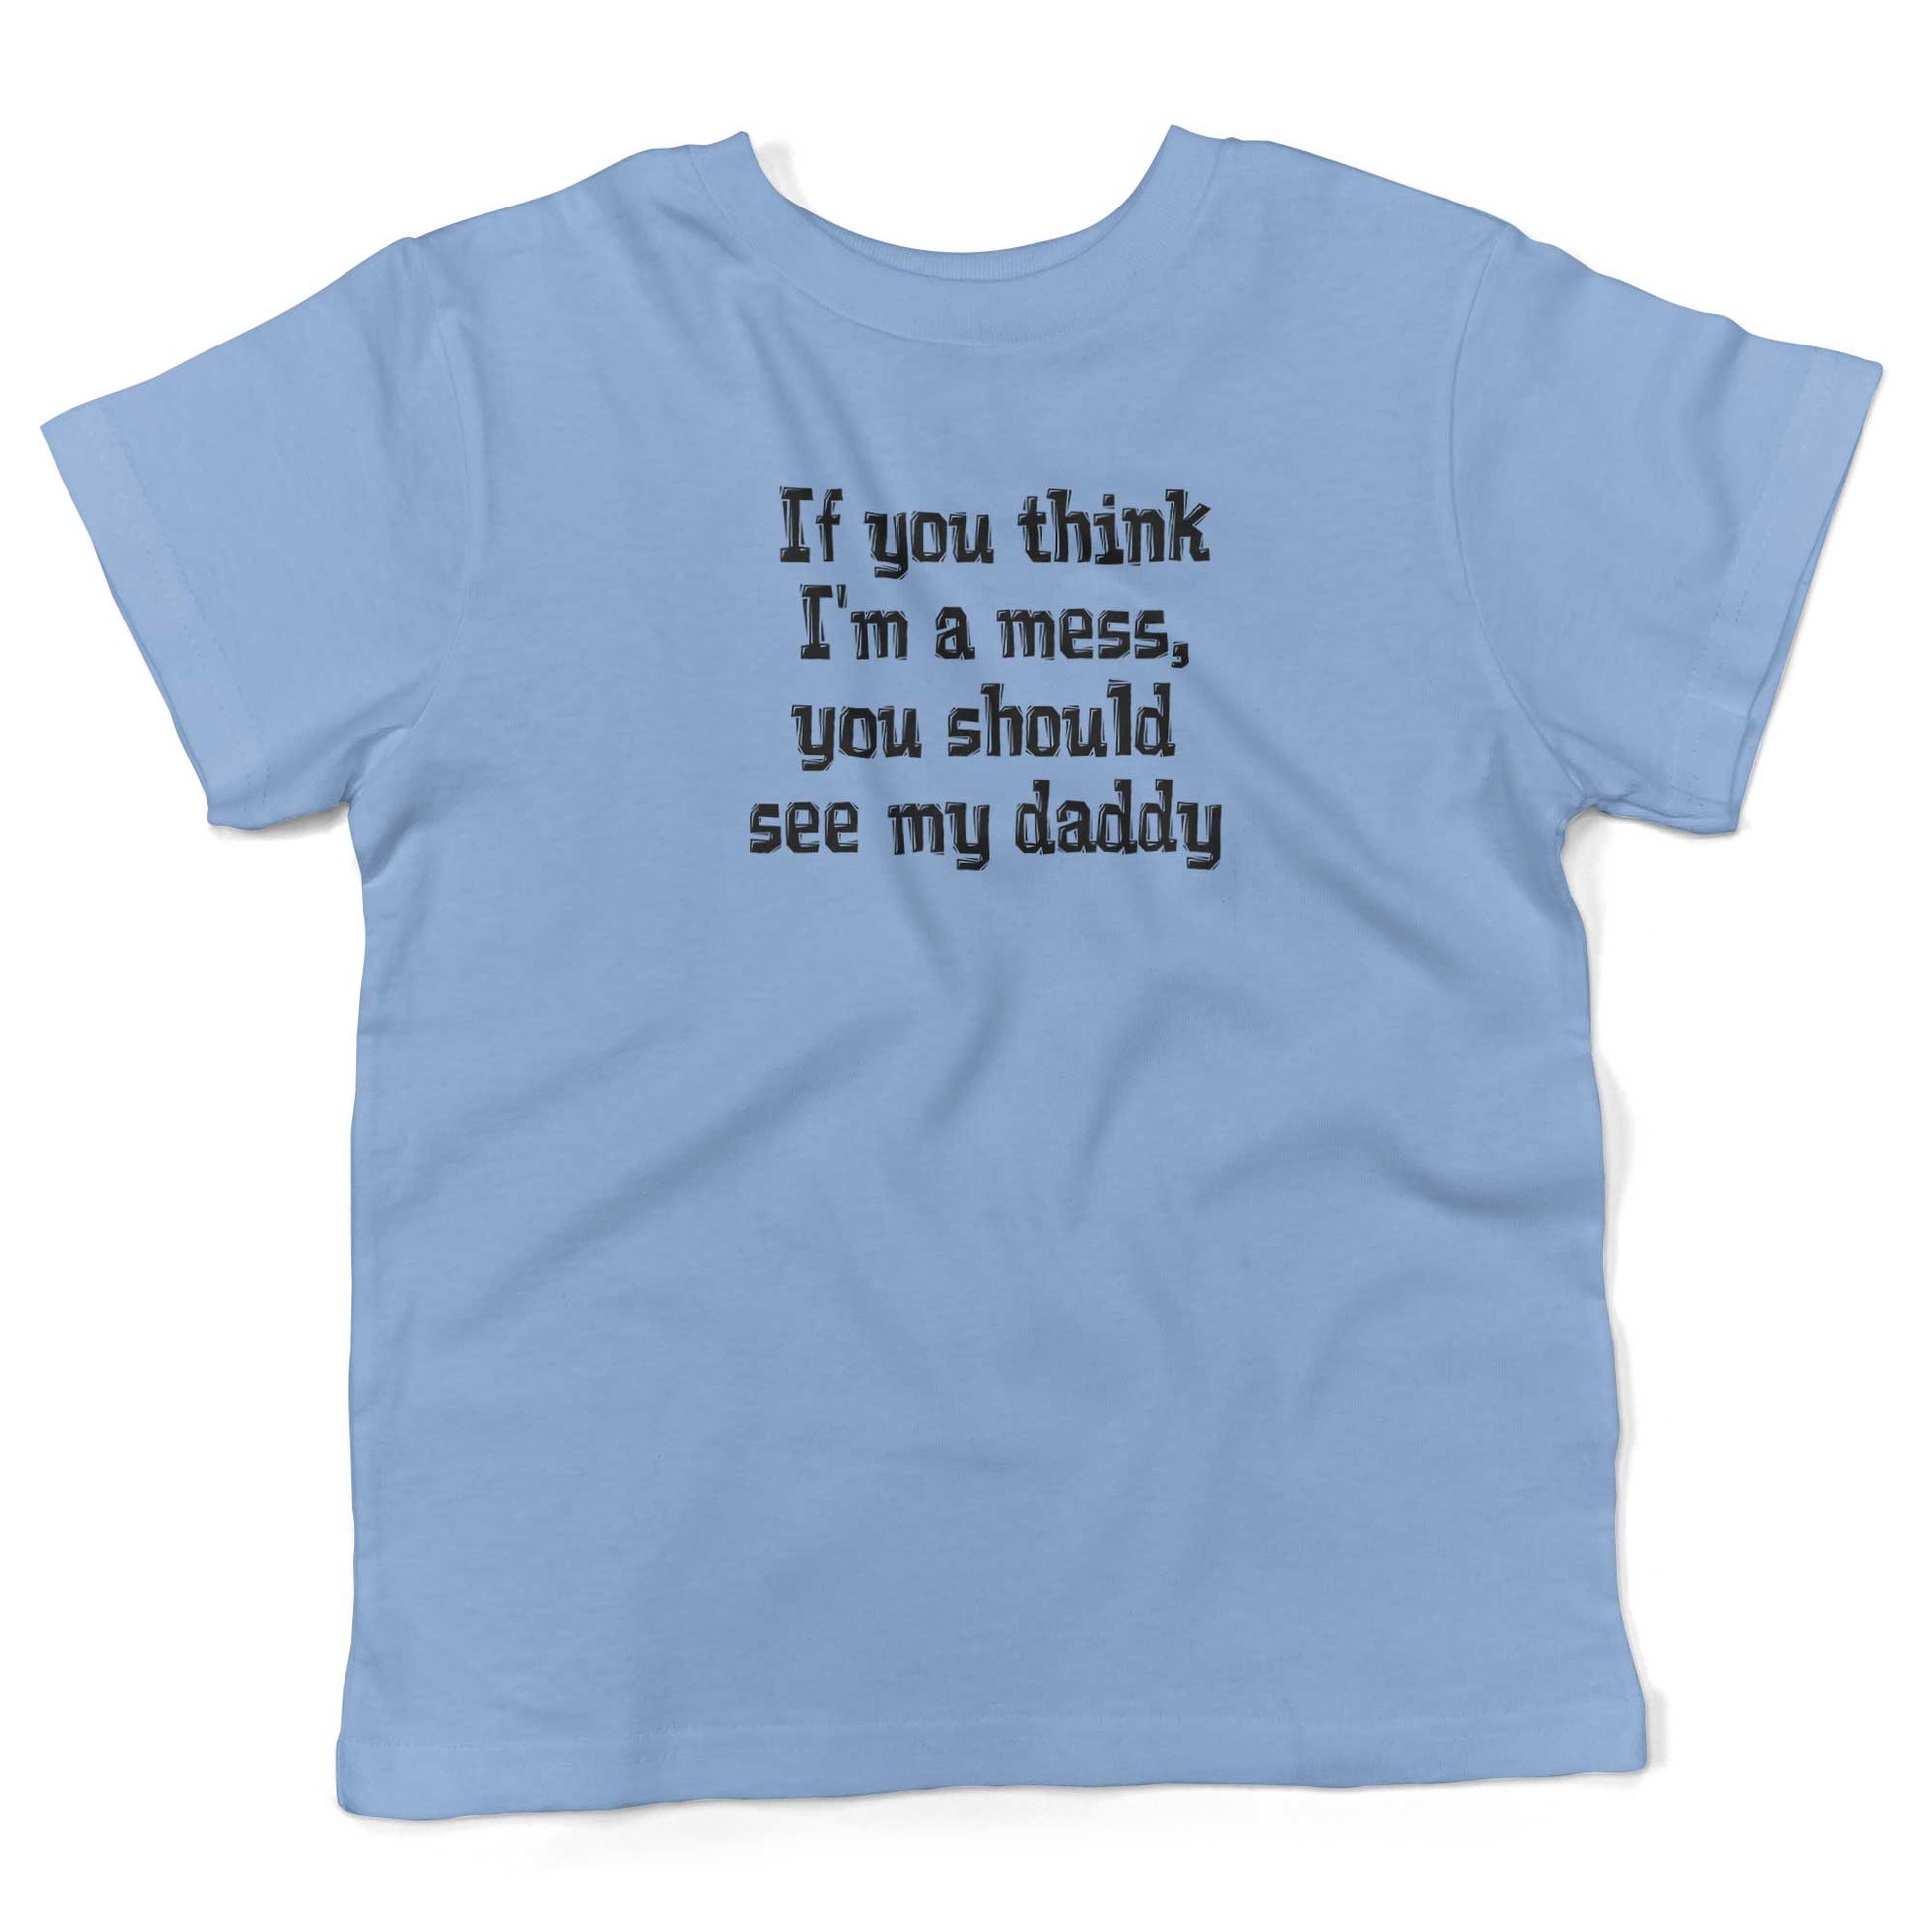 If You Think I'm A Mess, You Should See My Daddy Toddler Shirt-Organic Baby Blue-2T